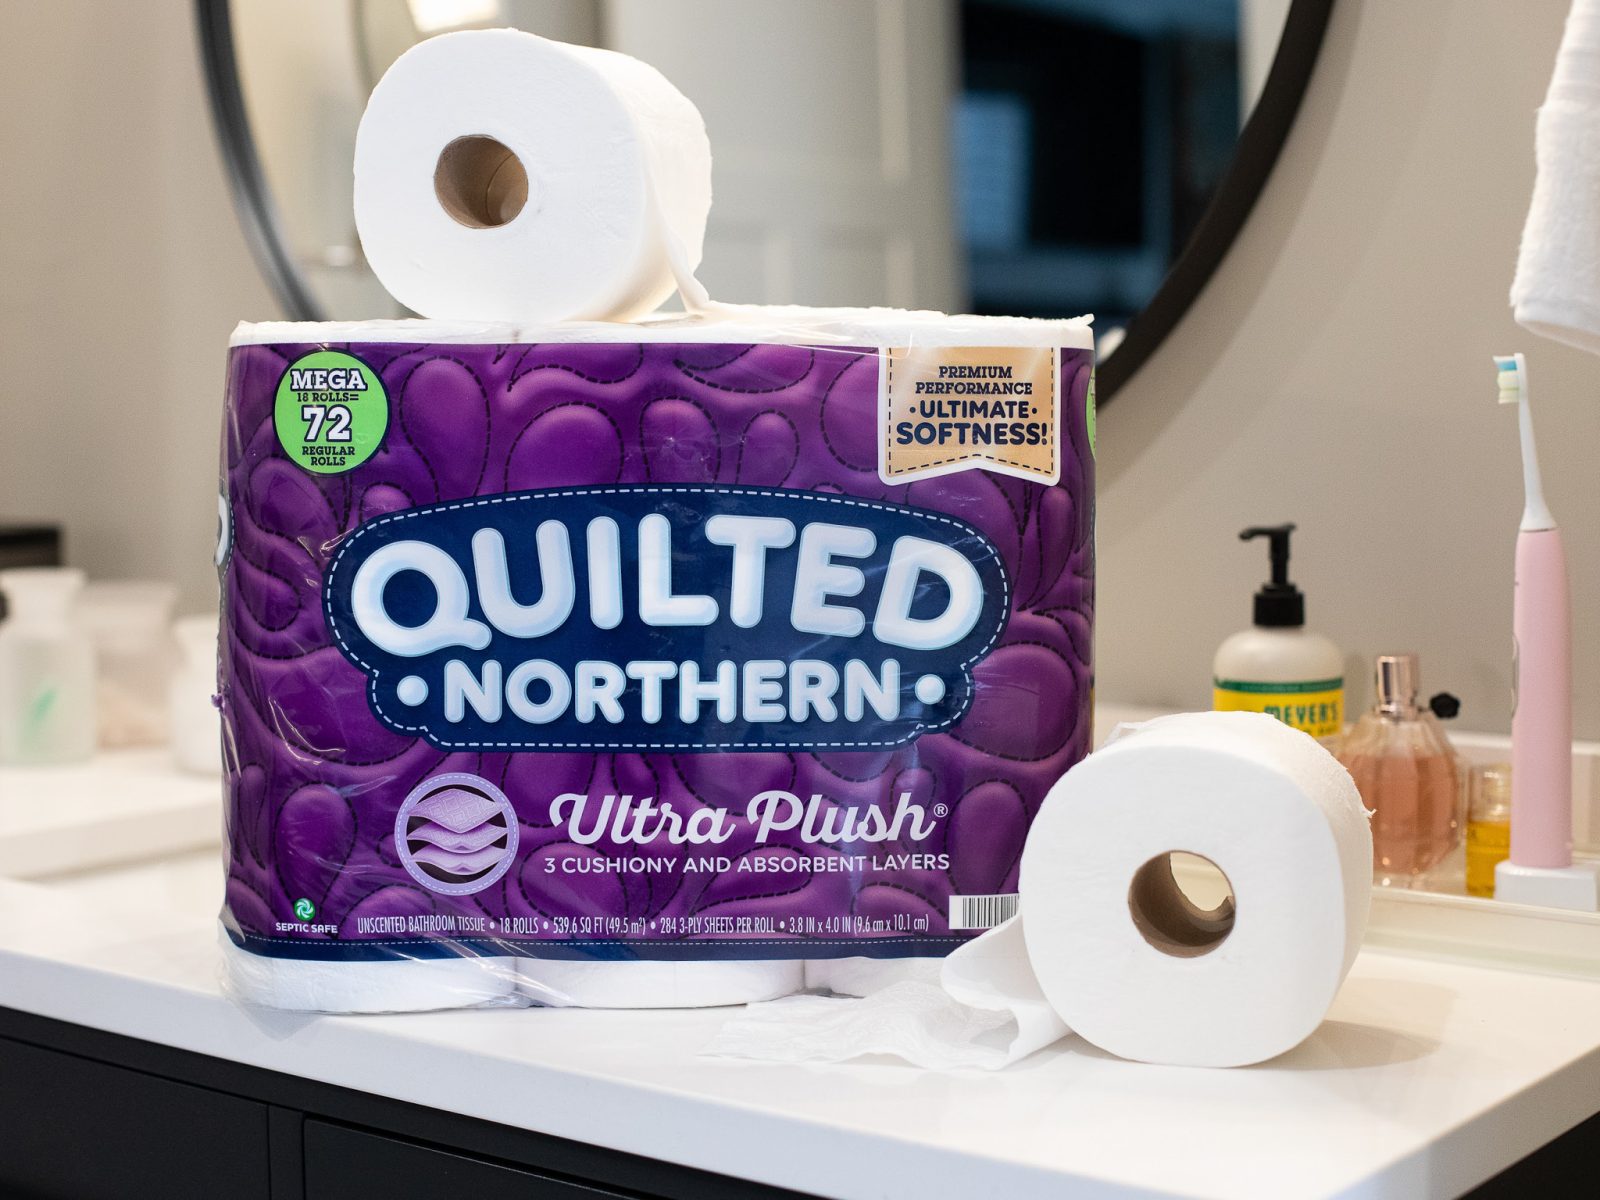 Mega Roll Packages Of Quilted Northern Toilet Paper As Low As $10.49 At Kroger (Regular Price $20.49)